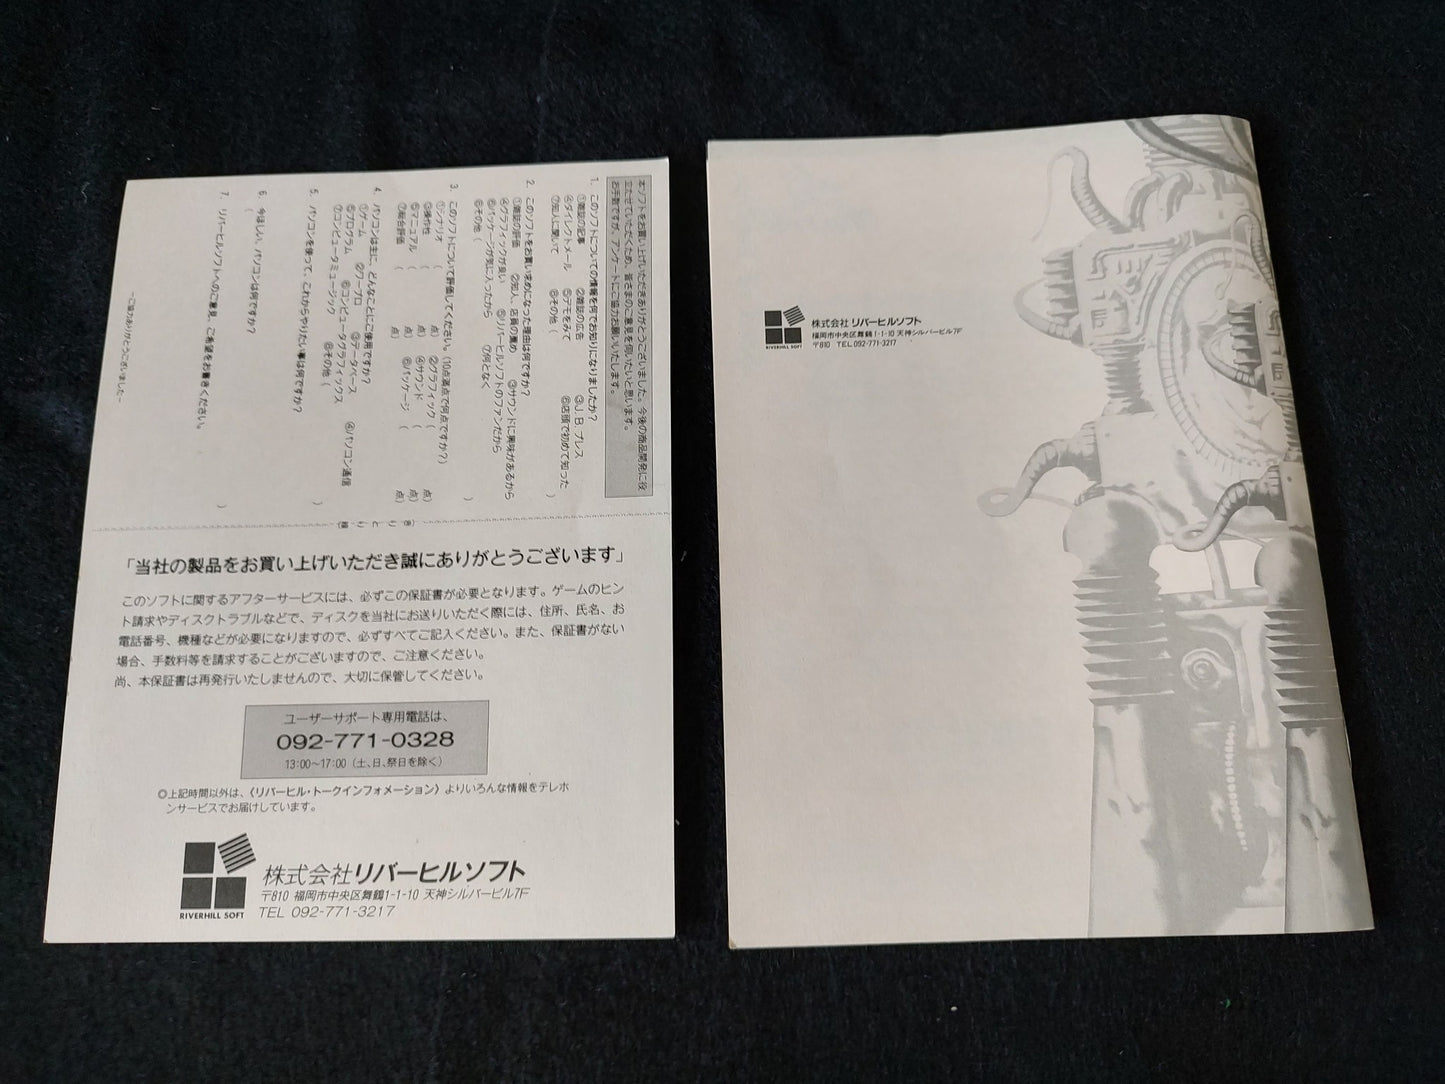 Non-tested Seed of Dragon MSX turbo R Game 3.5 FDD,Manual ,Boxed set -f0809-